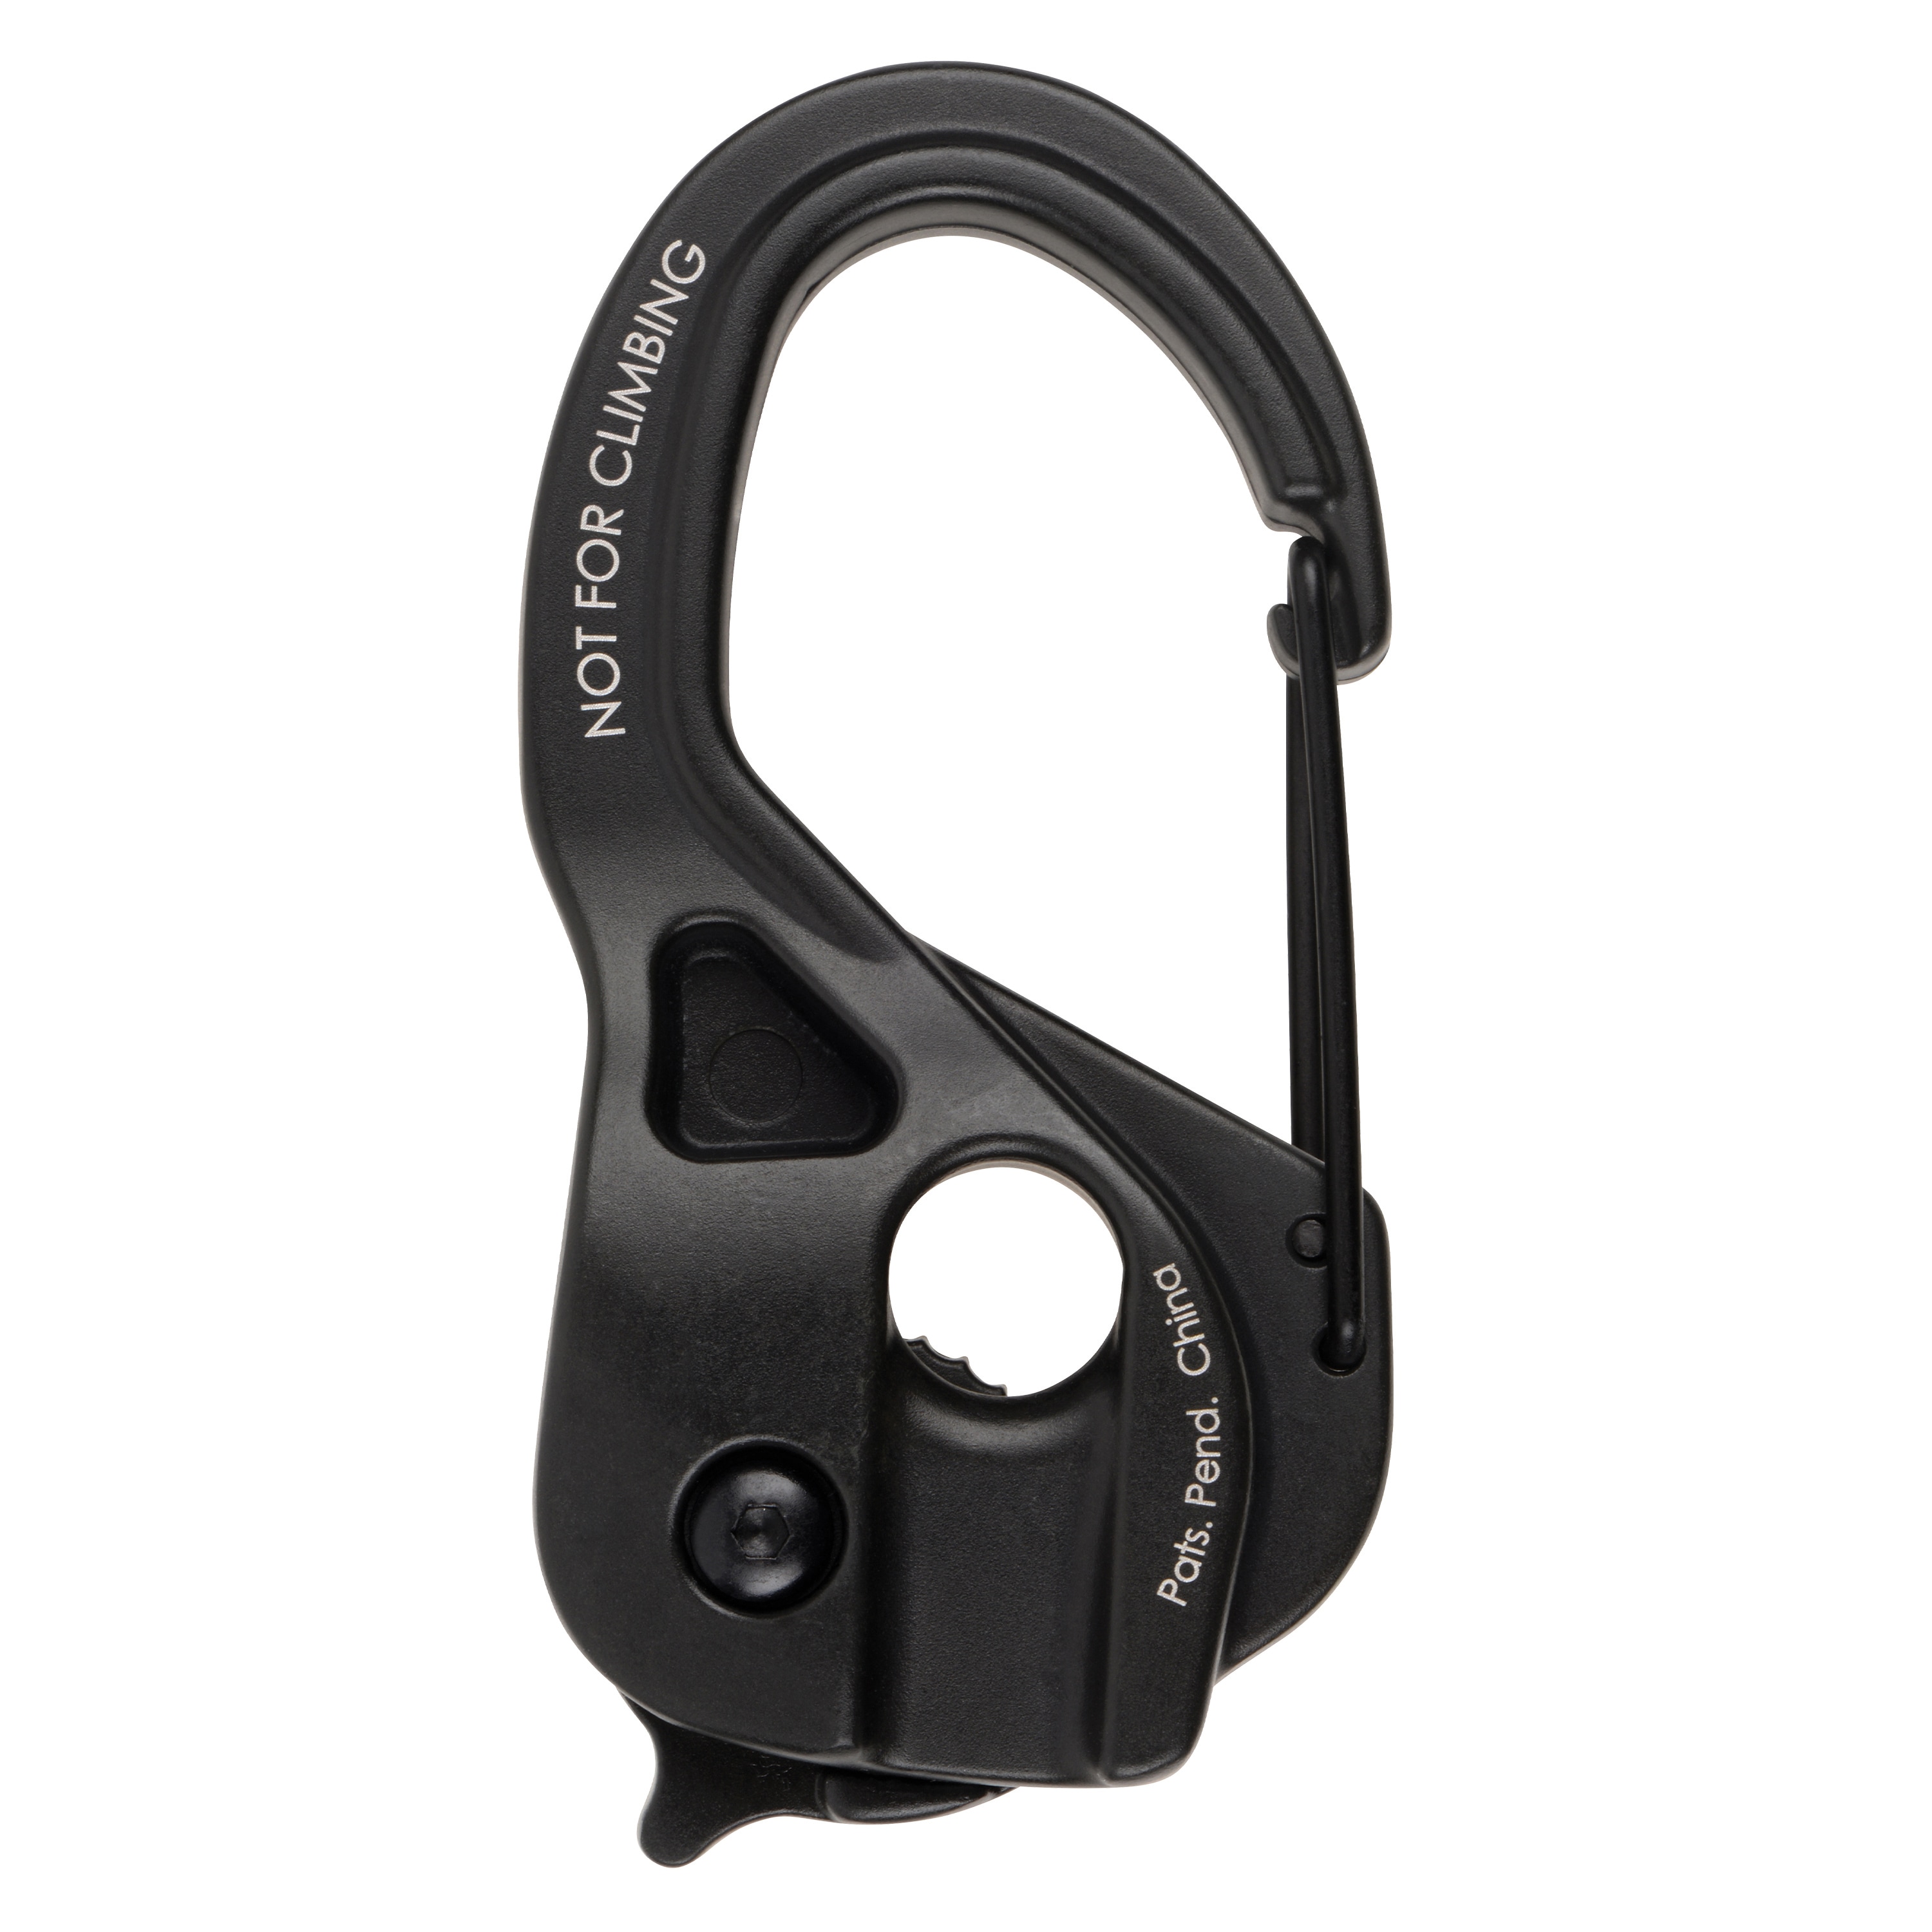 Suitable for Rope 2MM-5MM Diameter without rope Tie Down Cam Mechanism with Carabiner Clip Rainnao Lightweight CamJam Plastic Cord Tightener Black